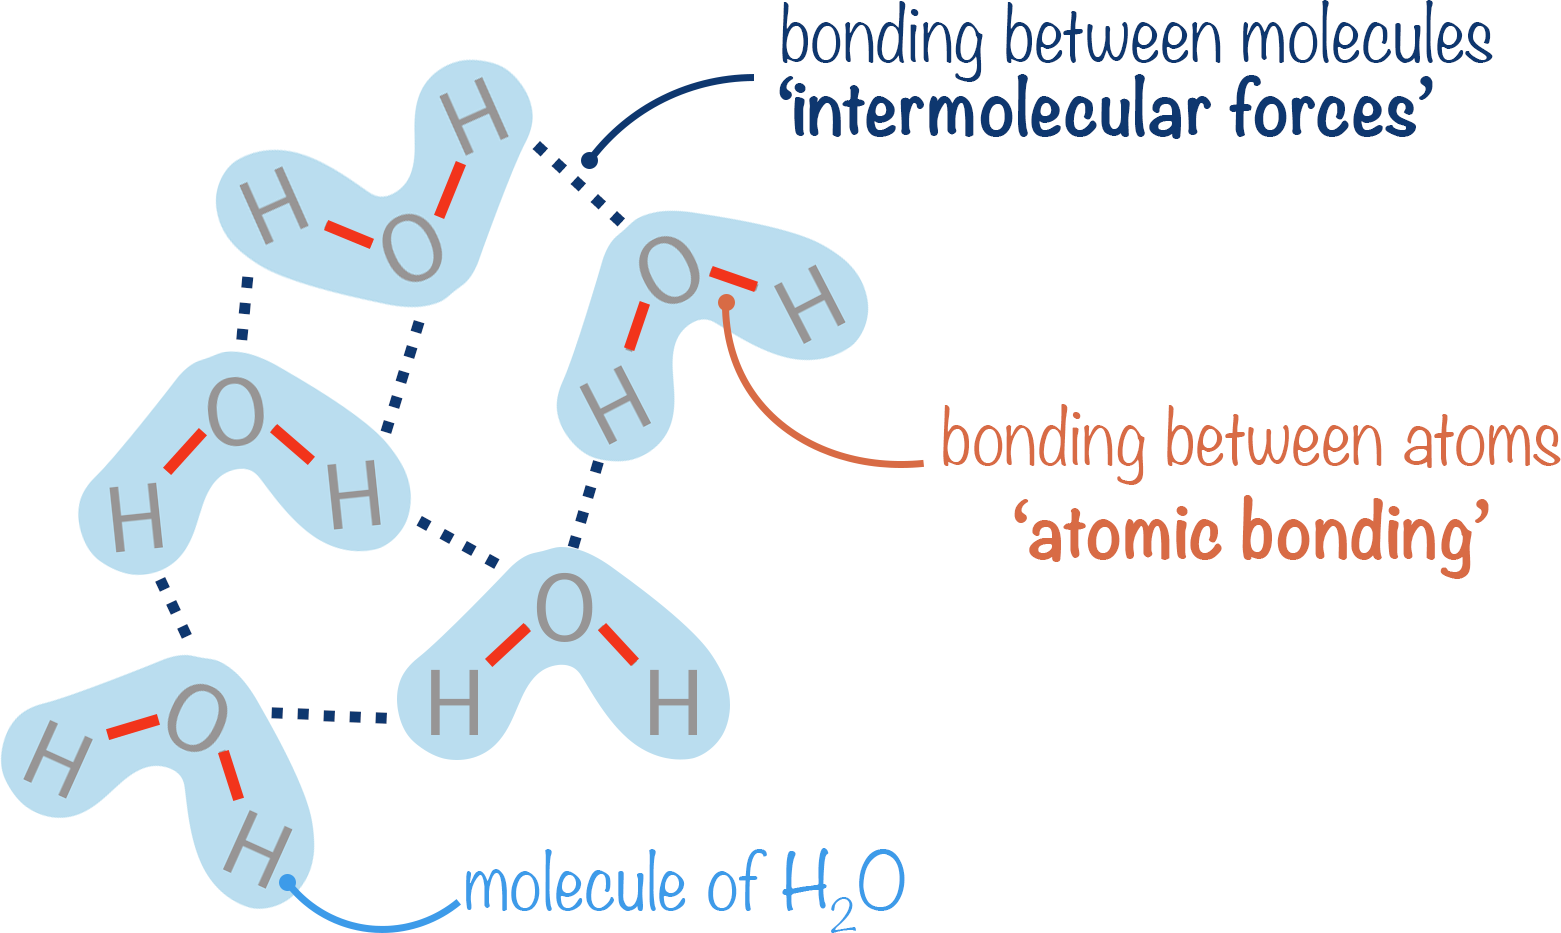 intermolecular forces and atomic bonding within water